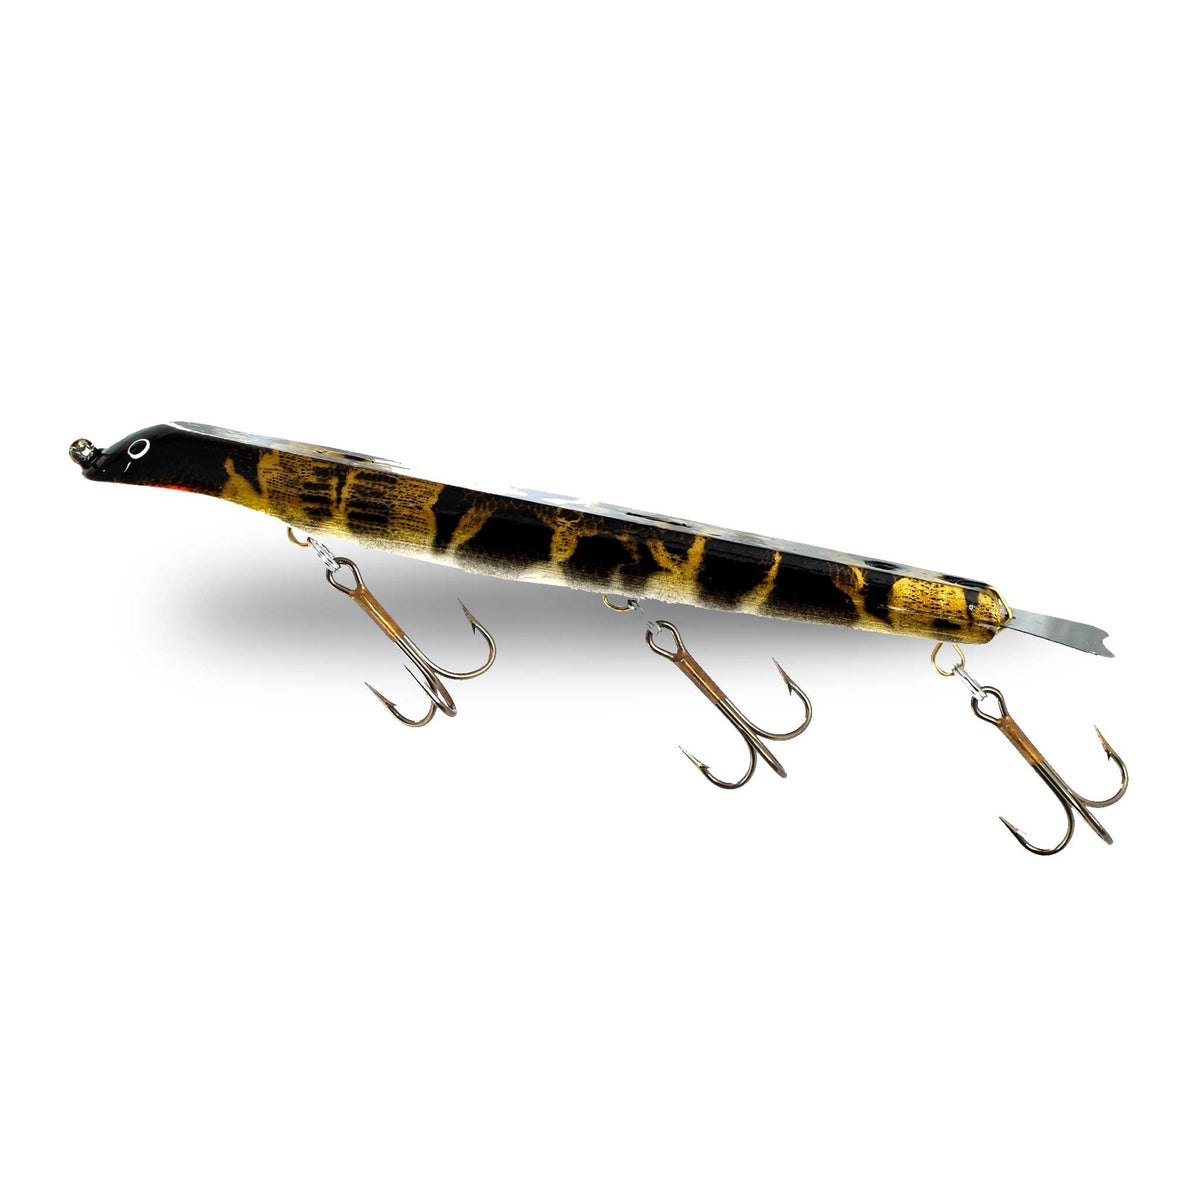 WorldCare® Sale Topwater Pike Fishing Penci L16g 10cm Artificial